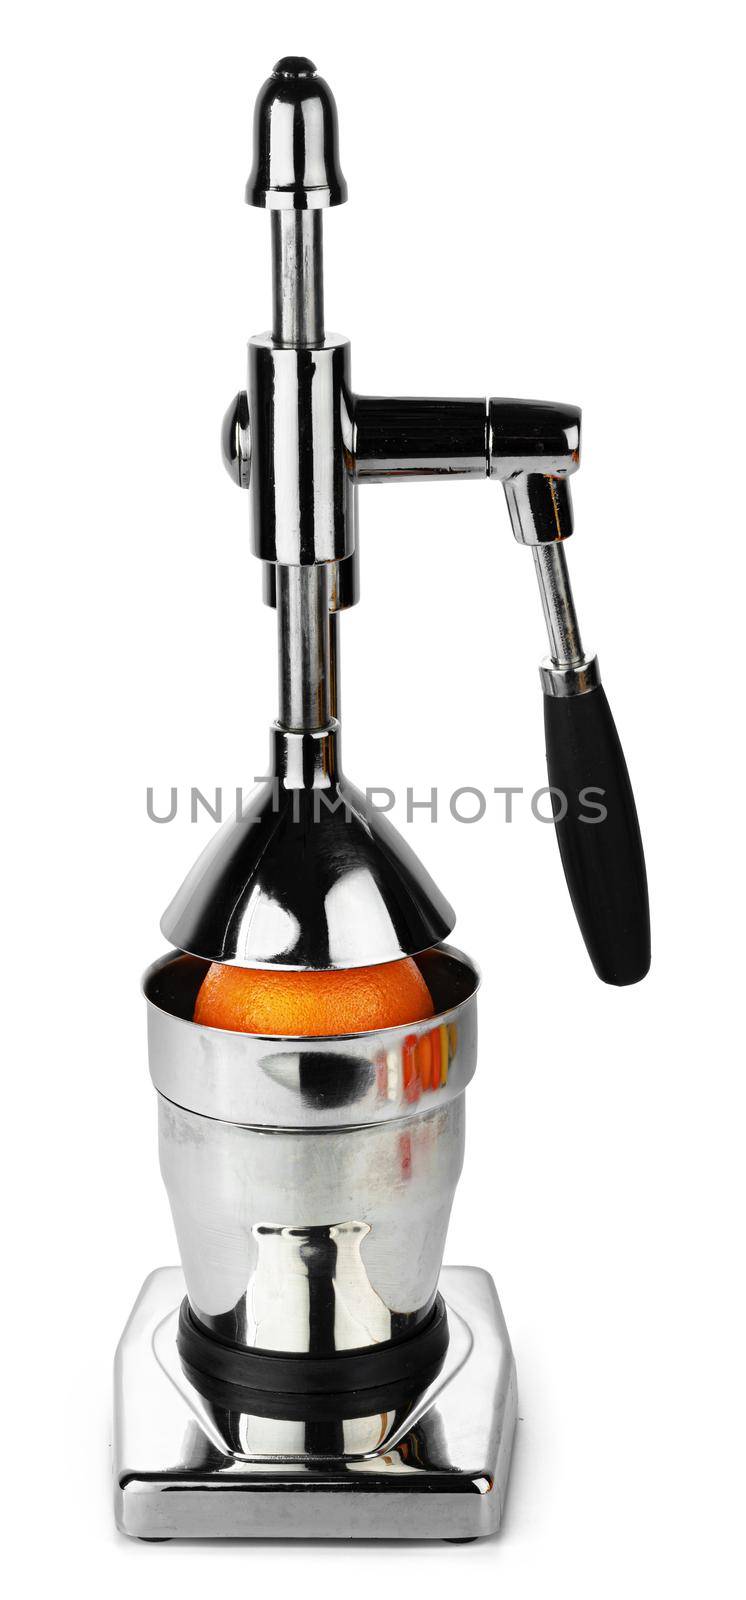 Mechanic juicer for citrus fruits isolated on white by Fabrikasimf